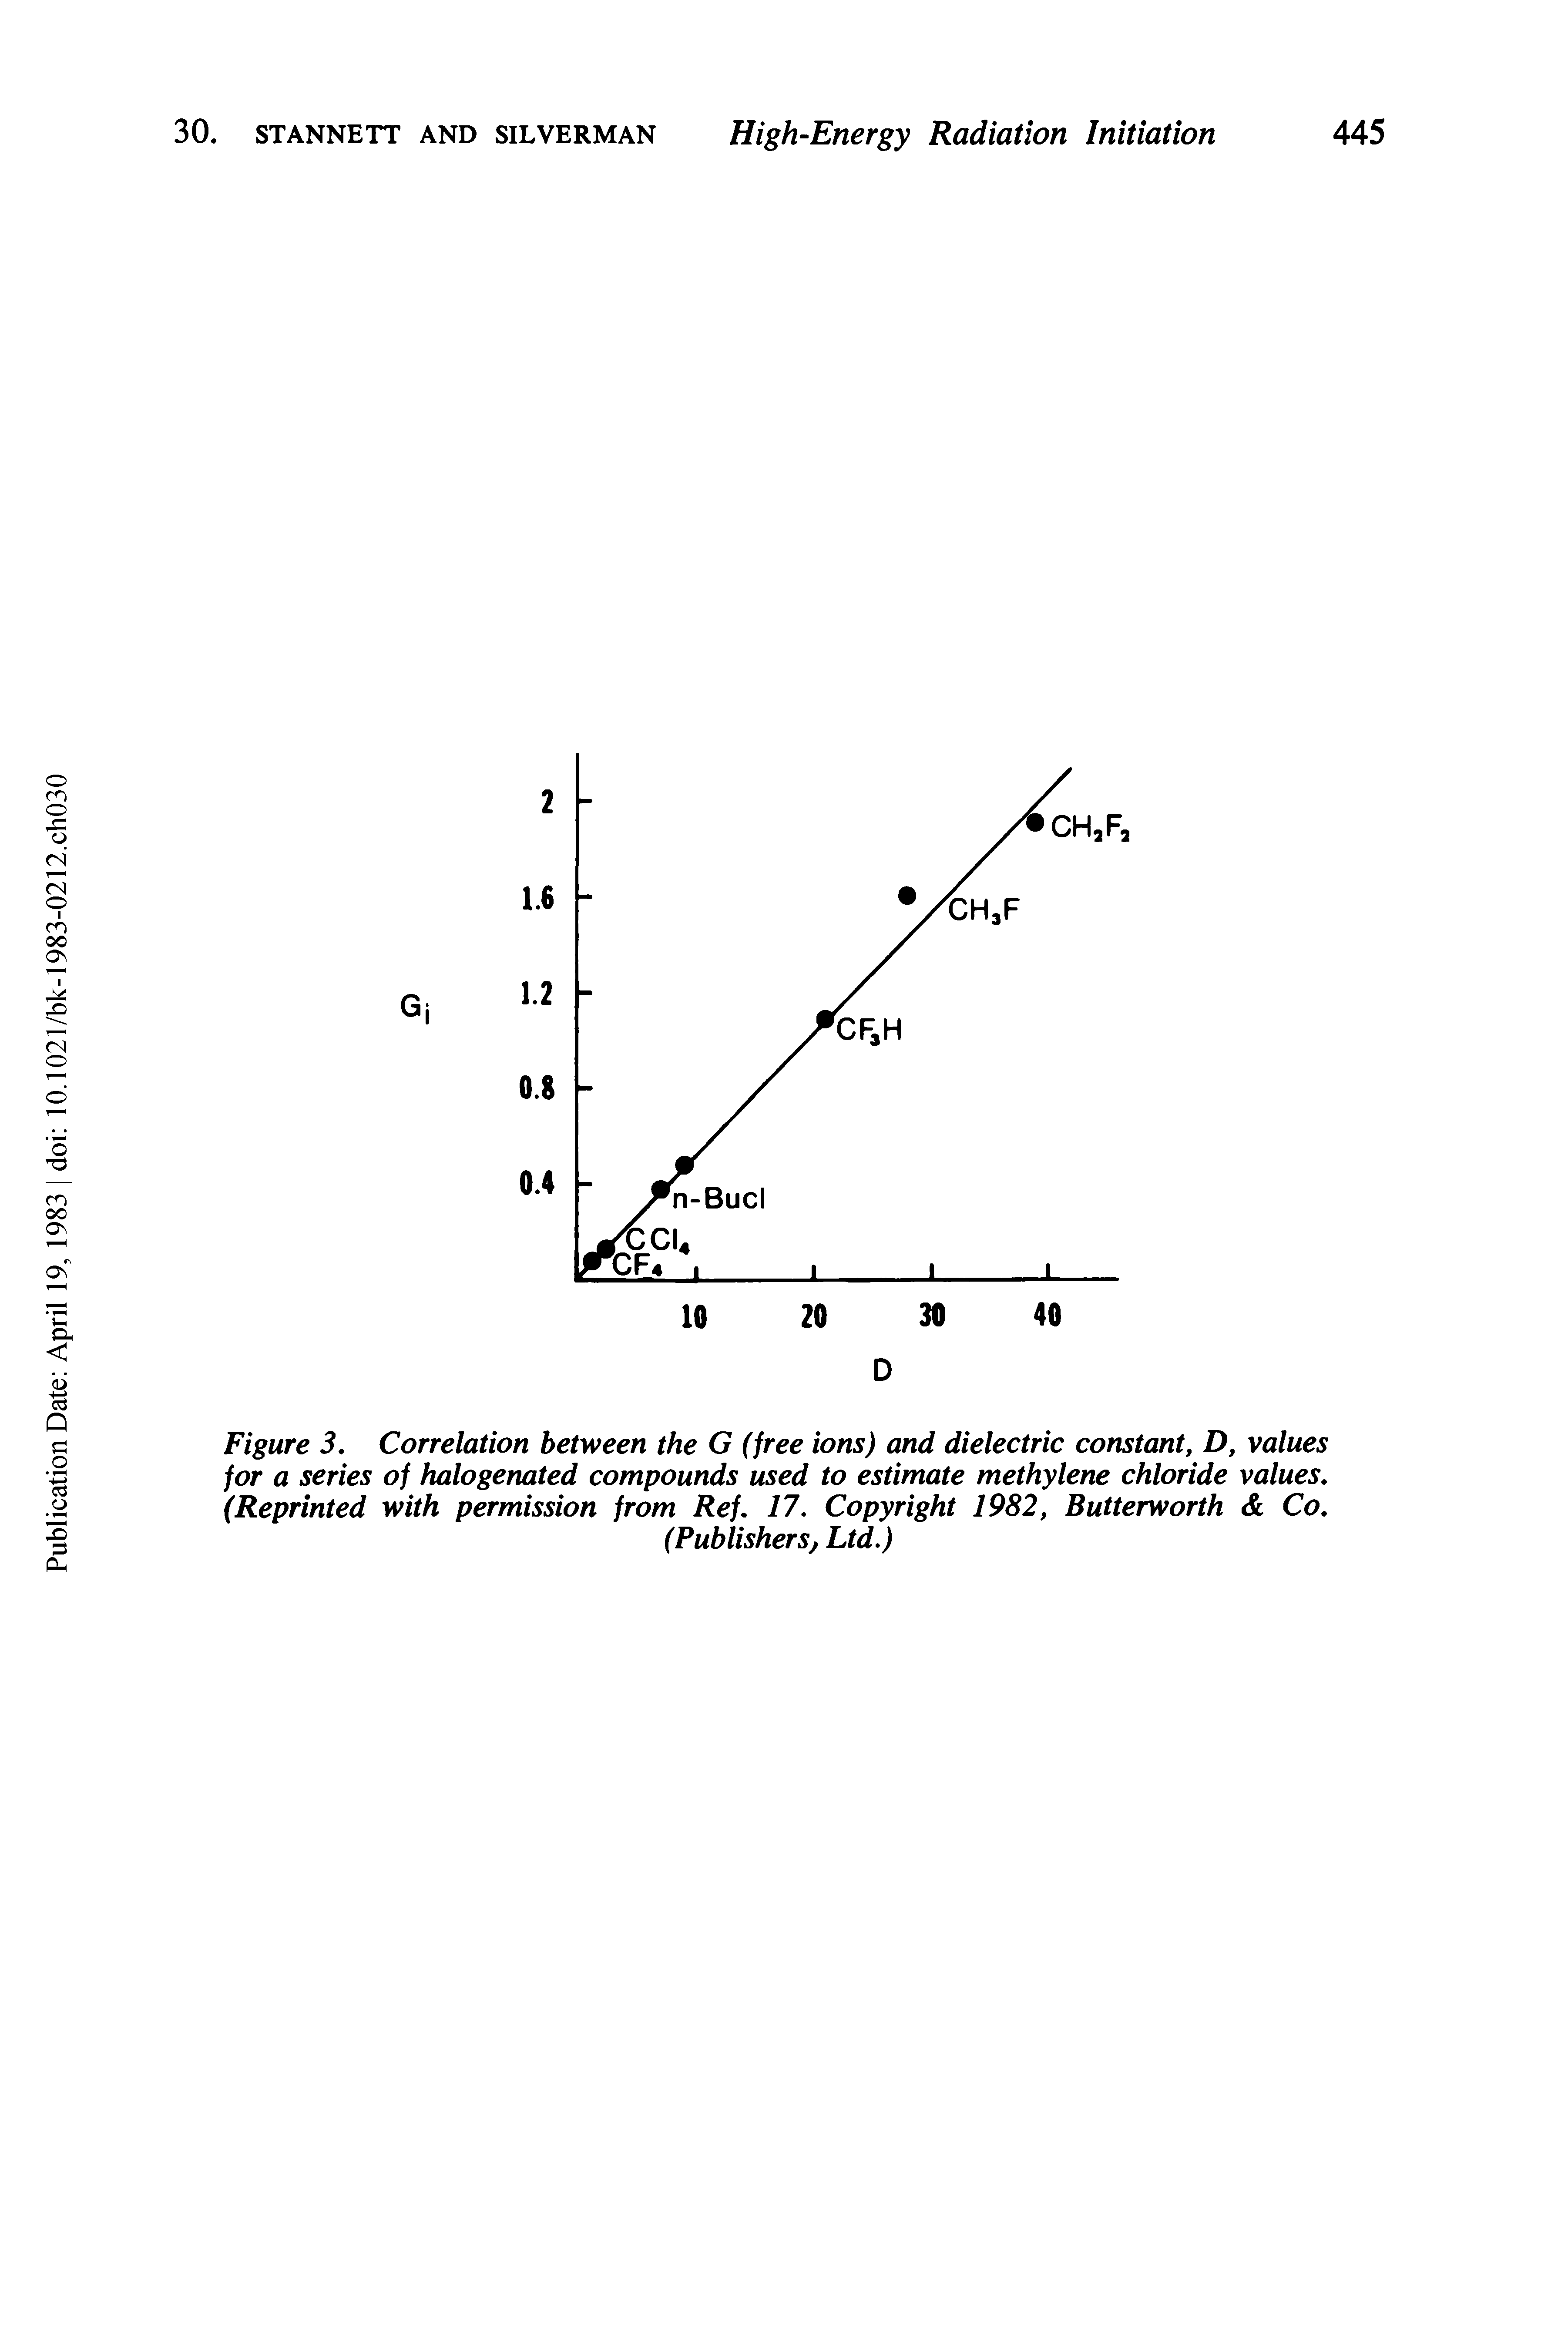 Figure 5. Correlation between the G (free ions) and dielectric constant, D, values for a series of halogenated compounds used to estimate methylene chloride values, (Reprinted with permission from Ref. 17. Copyright 1982, Butterworth Co.